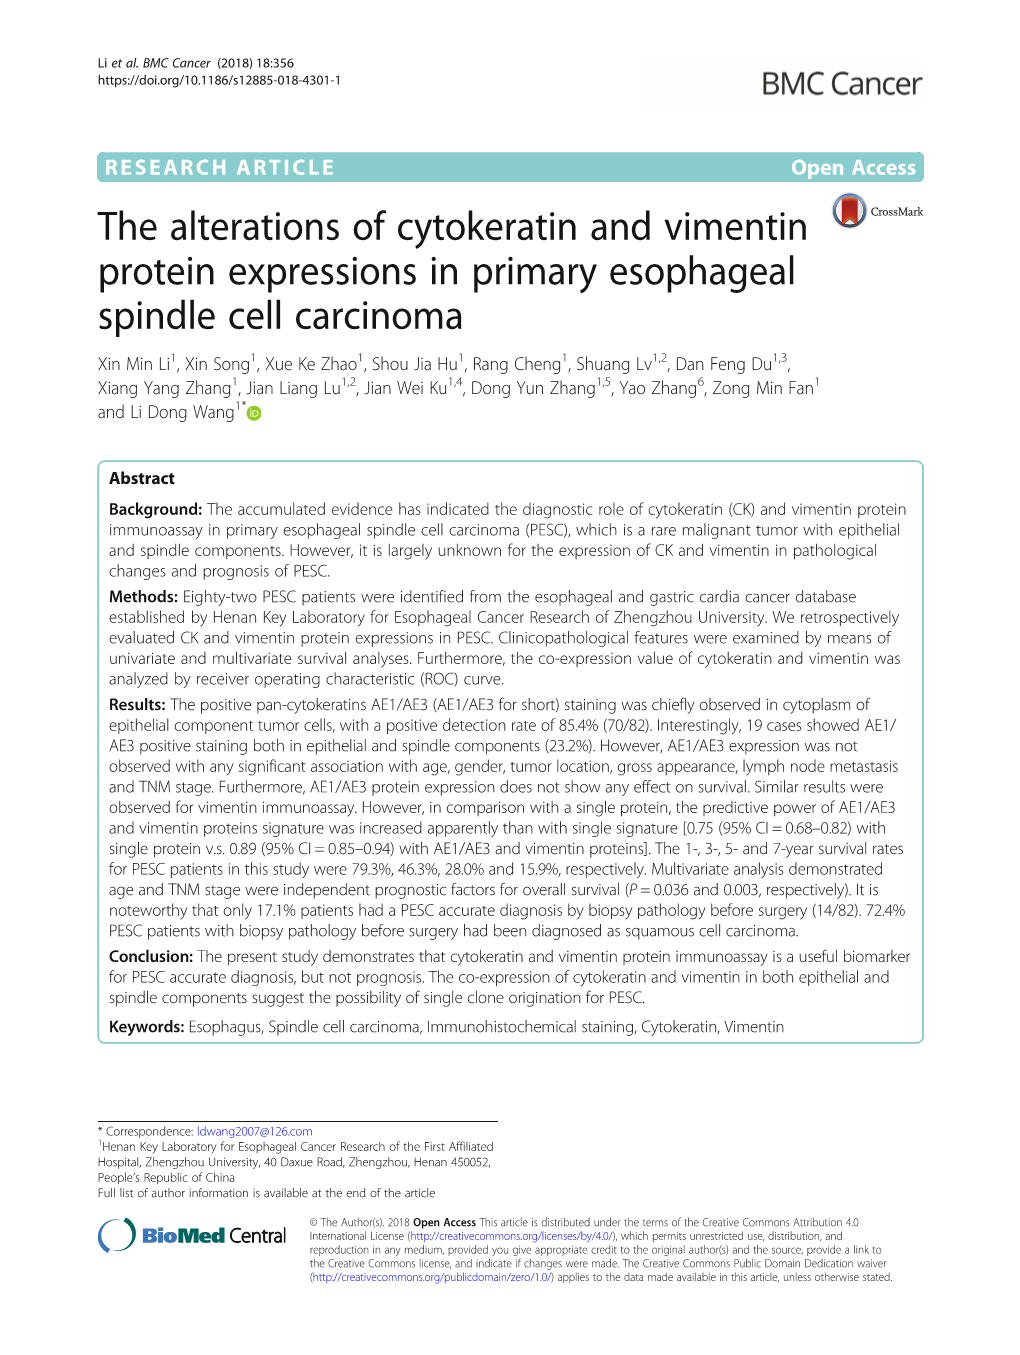 The Alterations of Cytokeratin and Vimentin Protein Expressions In